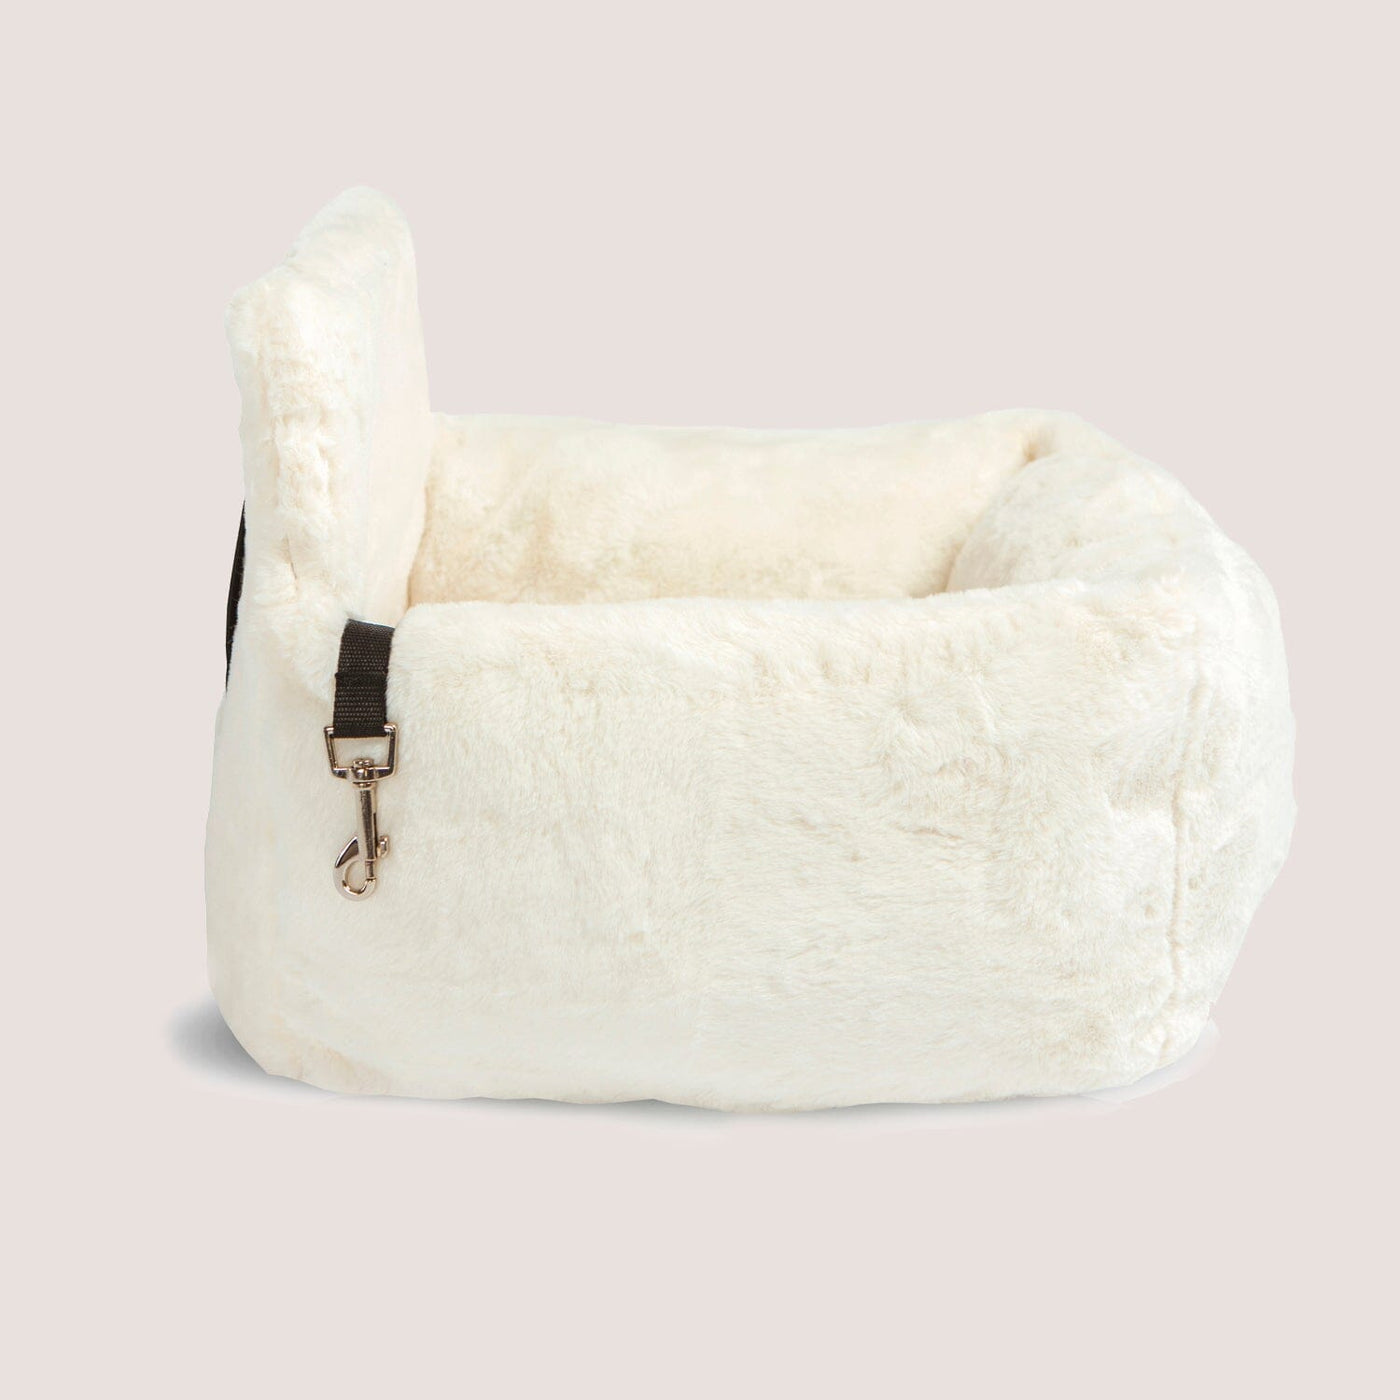 Ivory Cloud Car Seat Bed